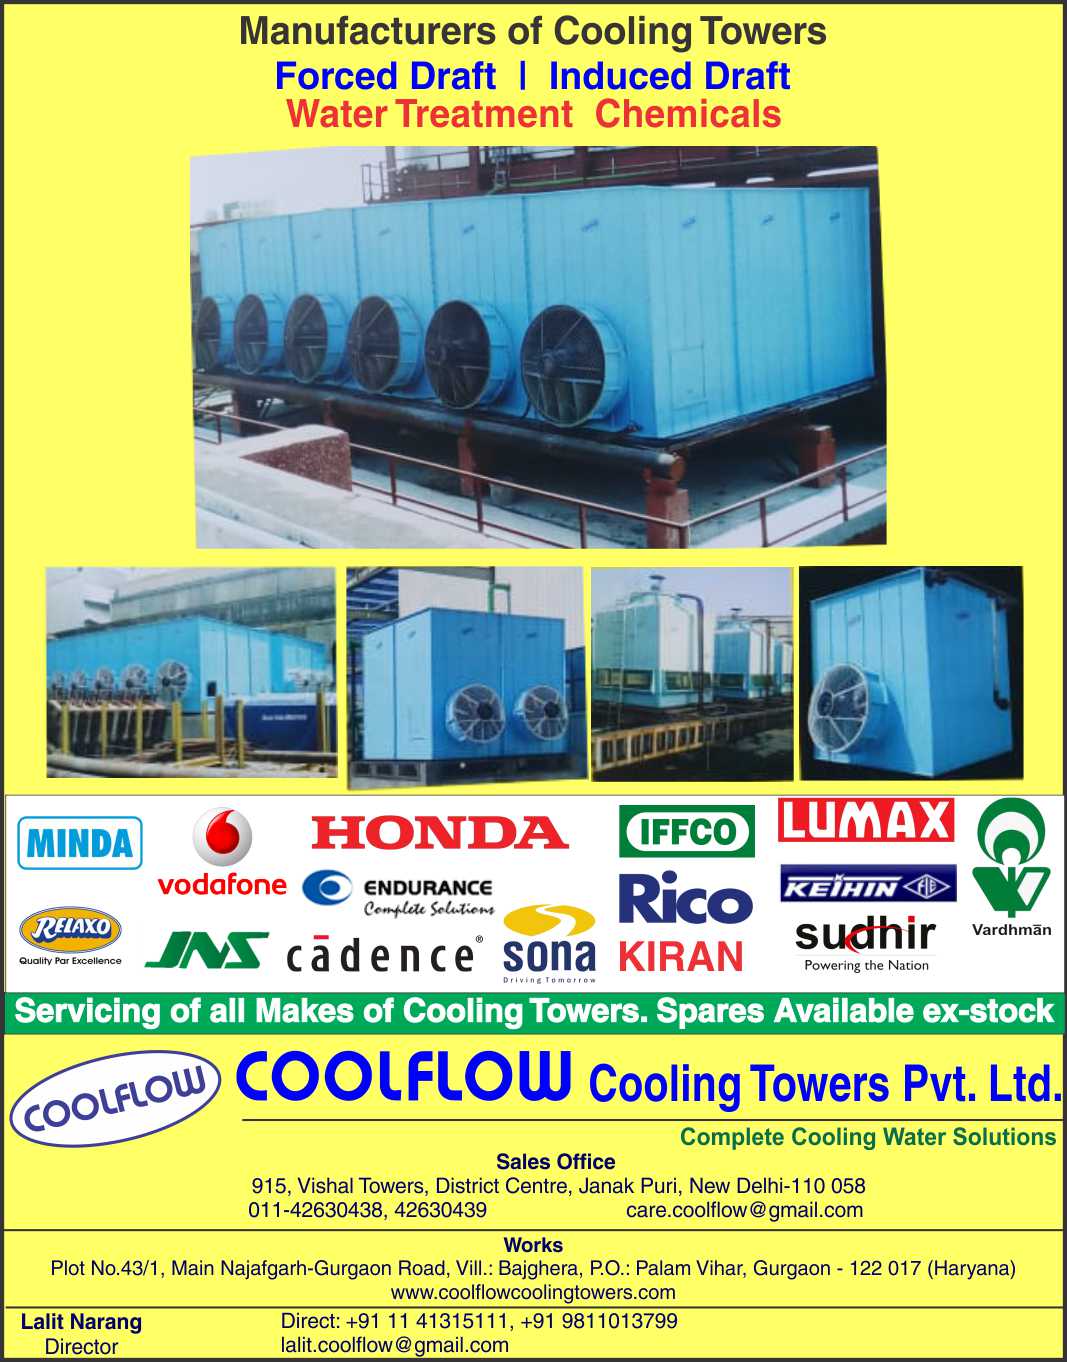 Coolflow Cooling Towers Pvt. Ltd.